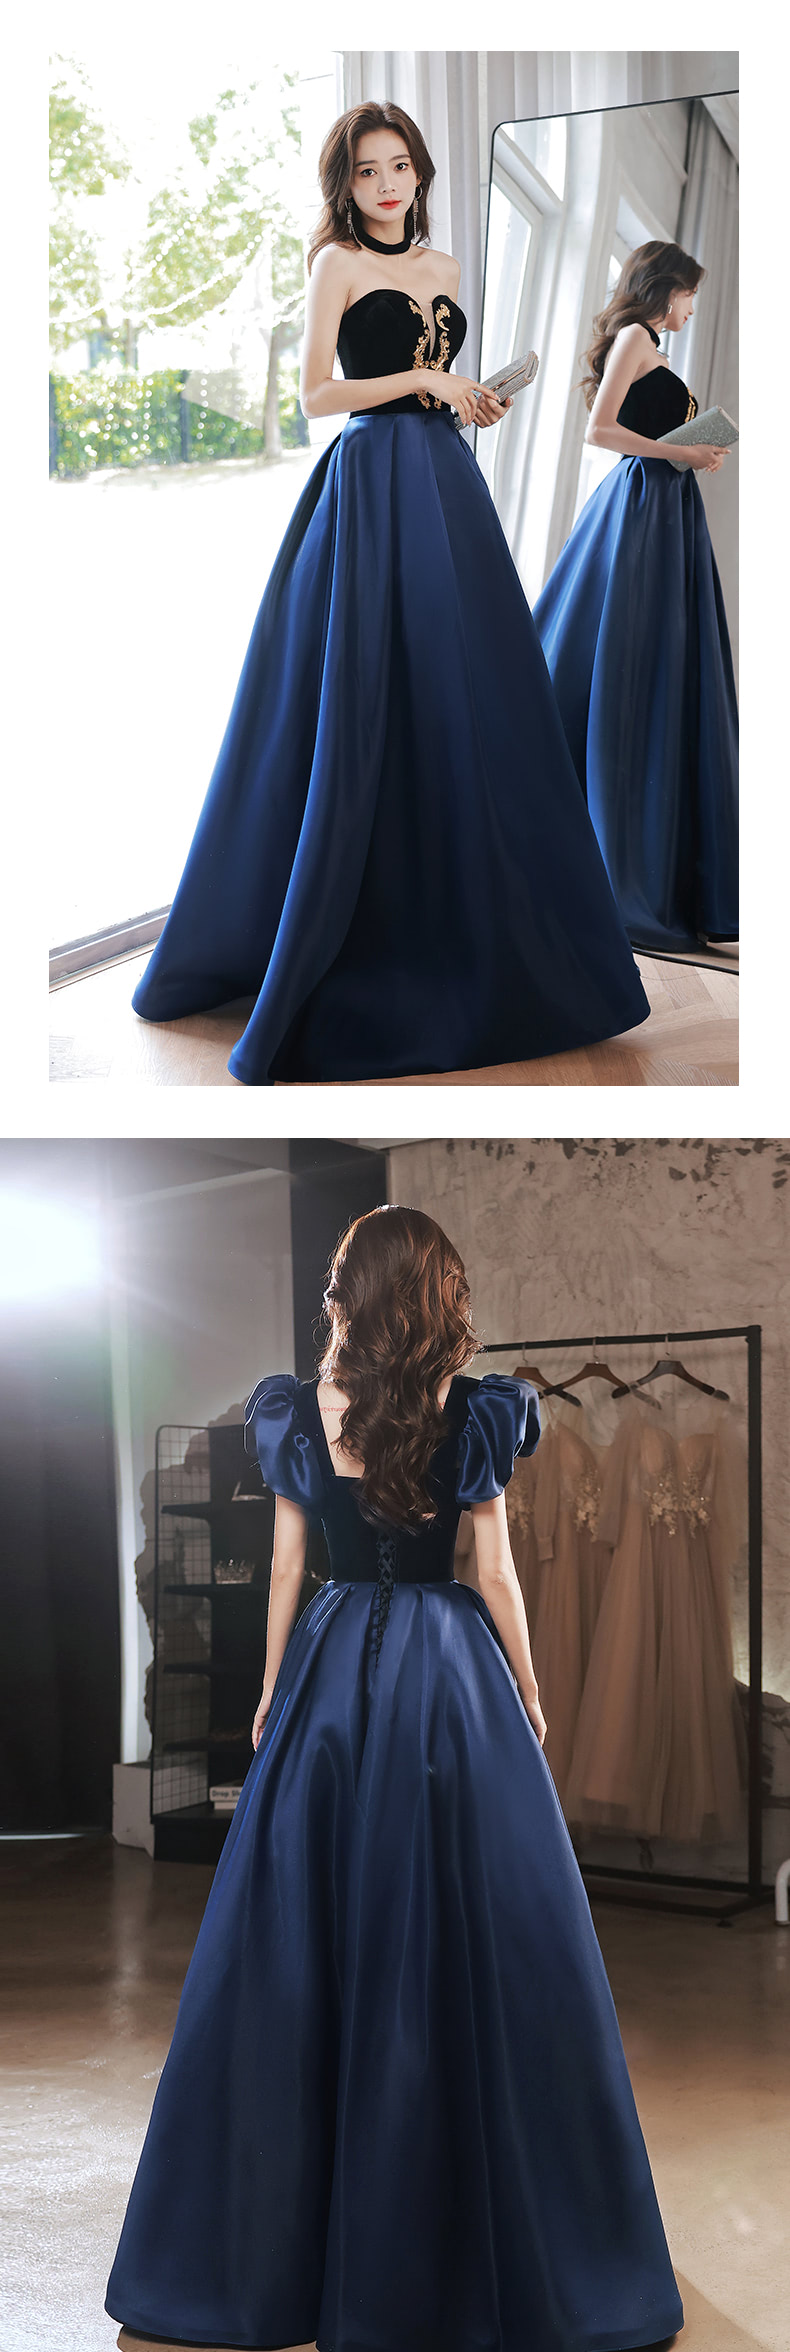 Fashion-Cocktail-Night-Dress-Blue-Evening-Dance-Party-Long-Gown11.jpg